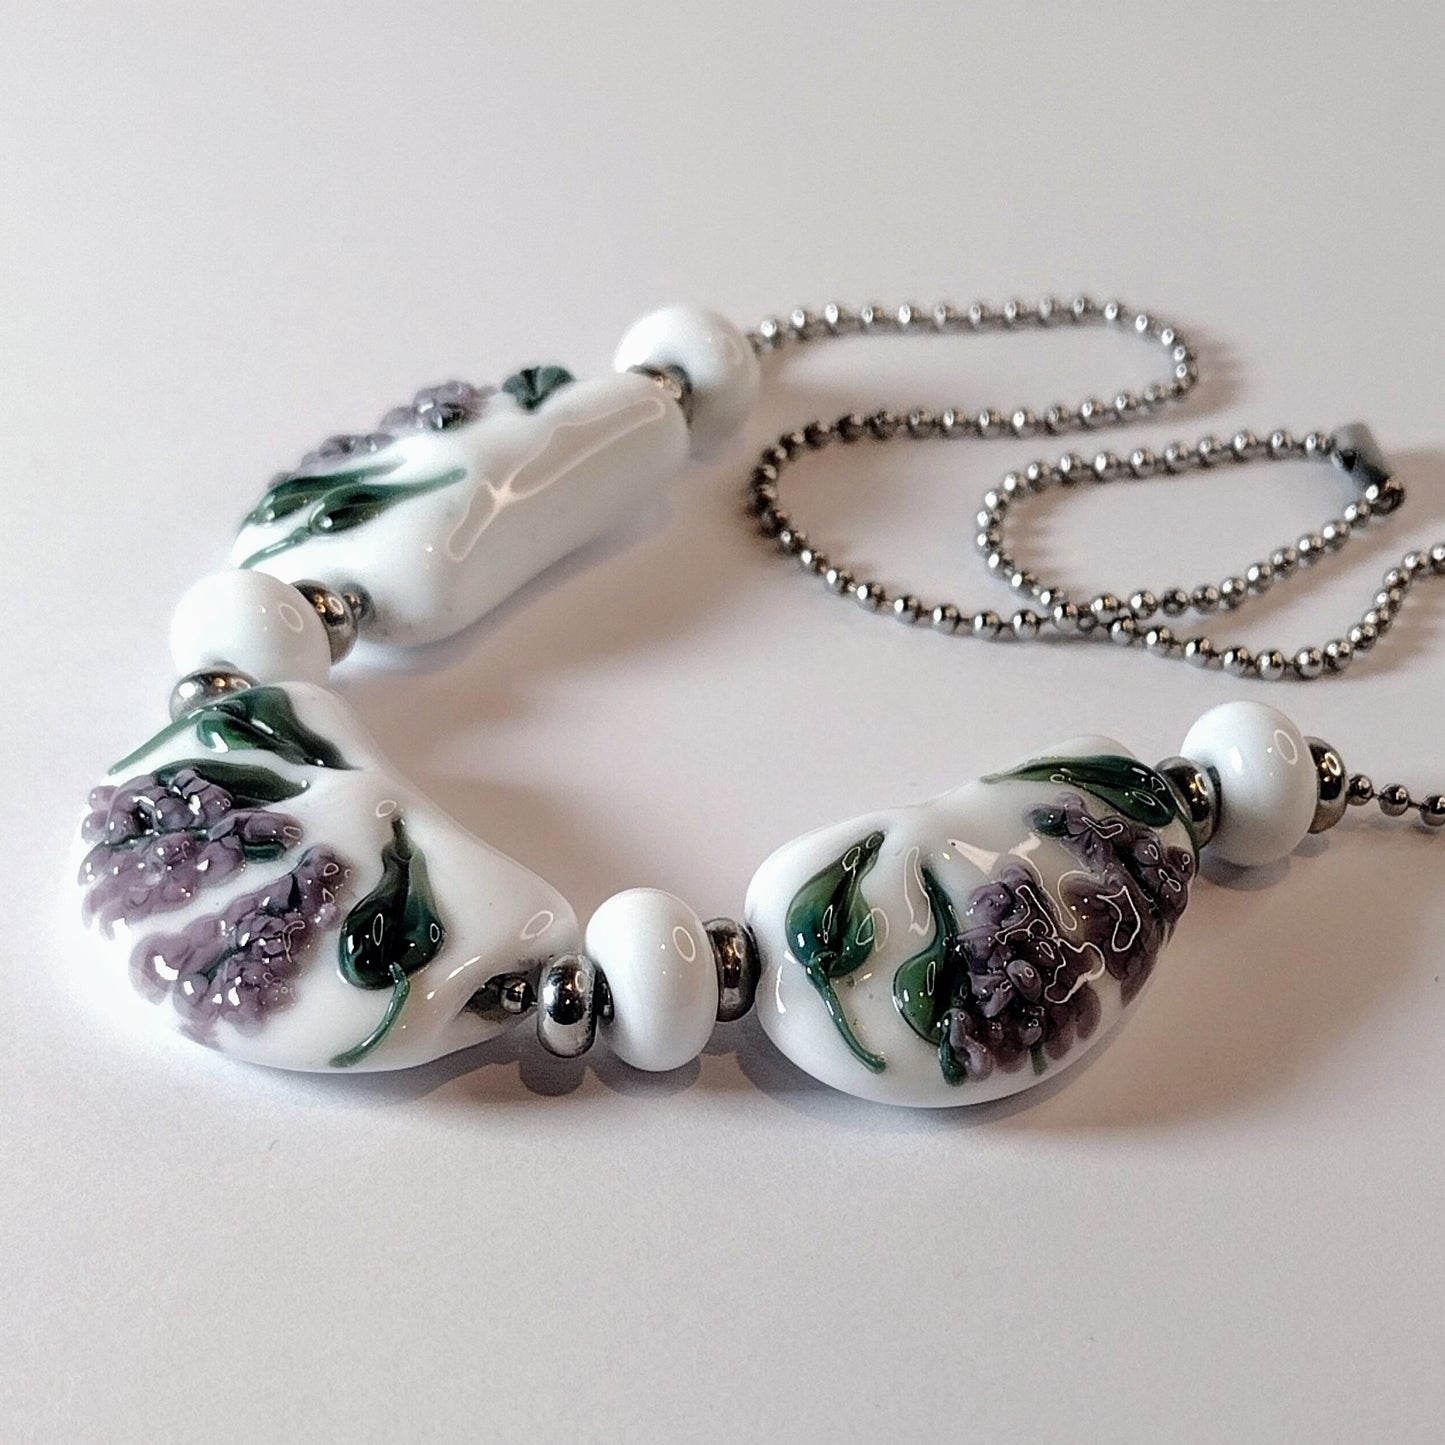 Lilac bower necklace